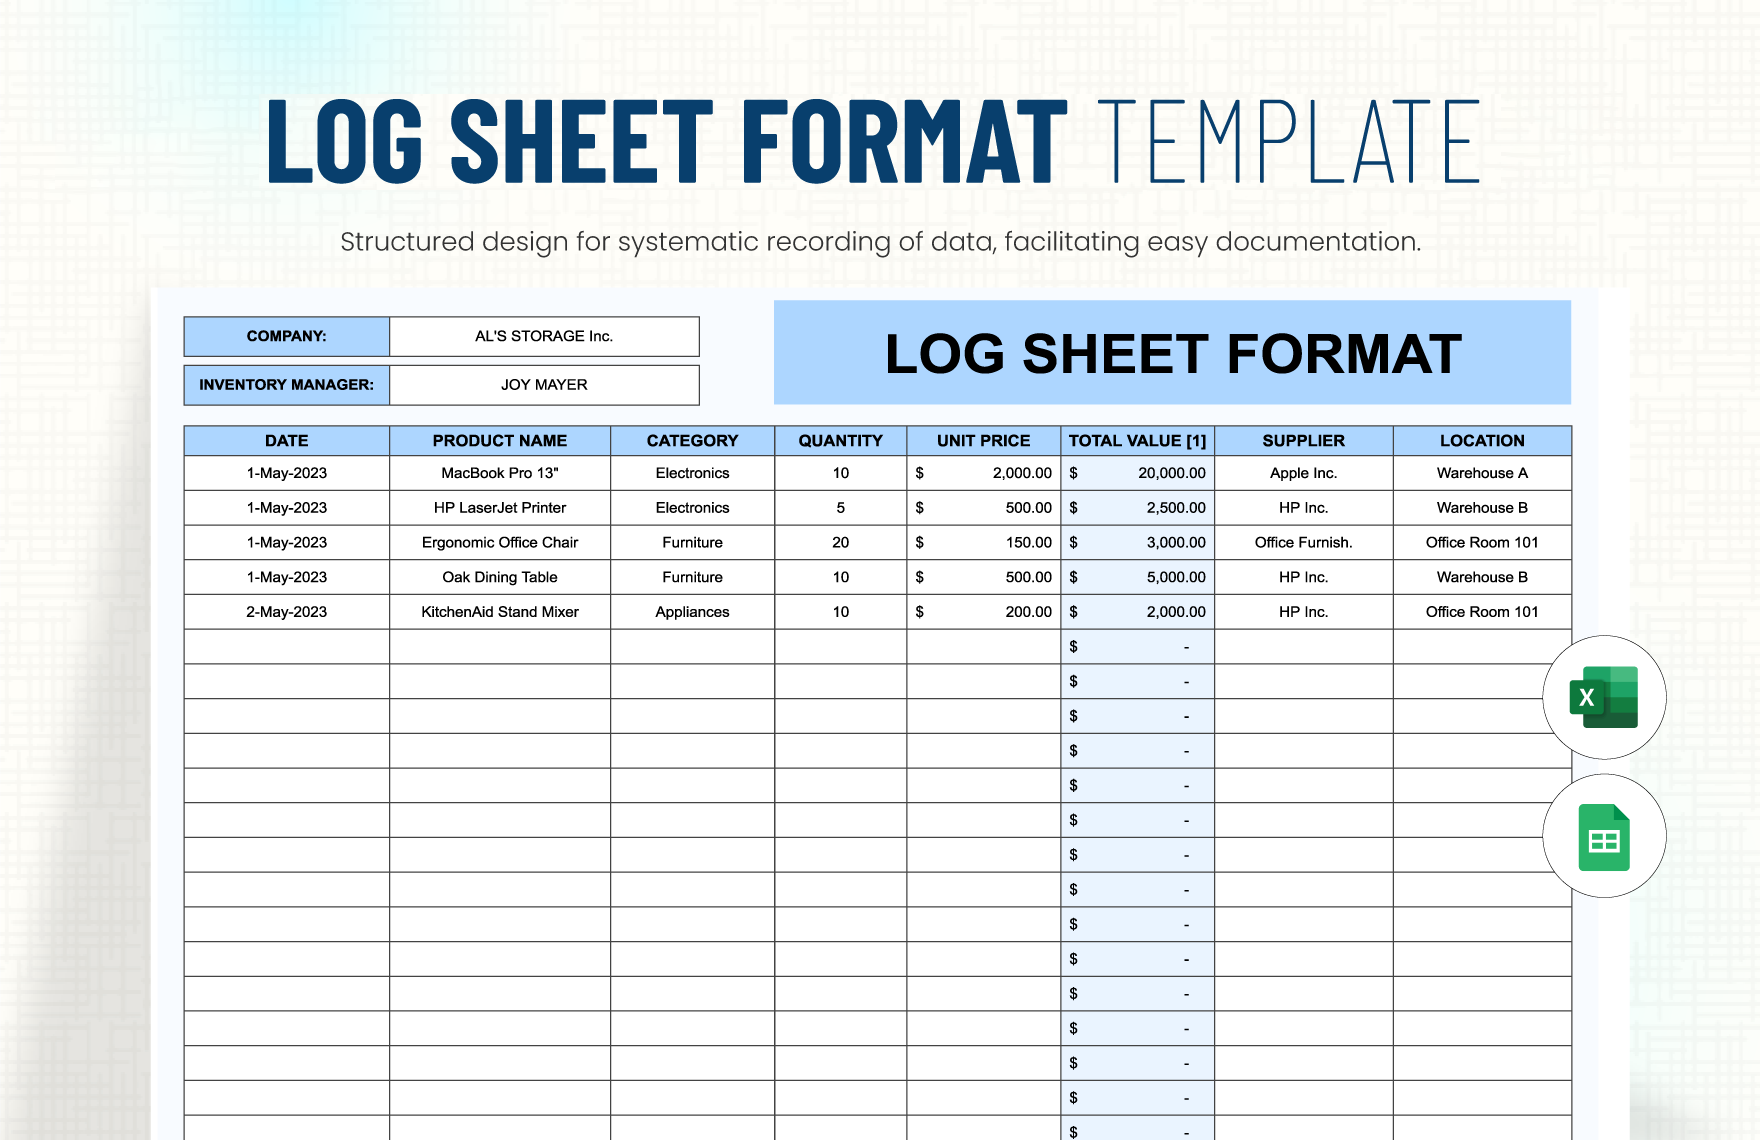 Free Log Sheet Format Template in Excel, Google Sheets